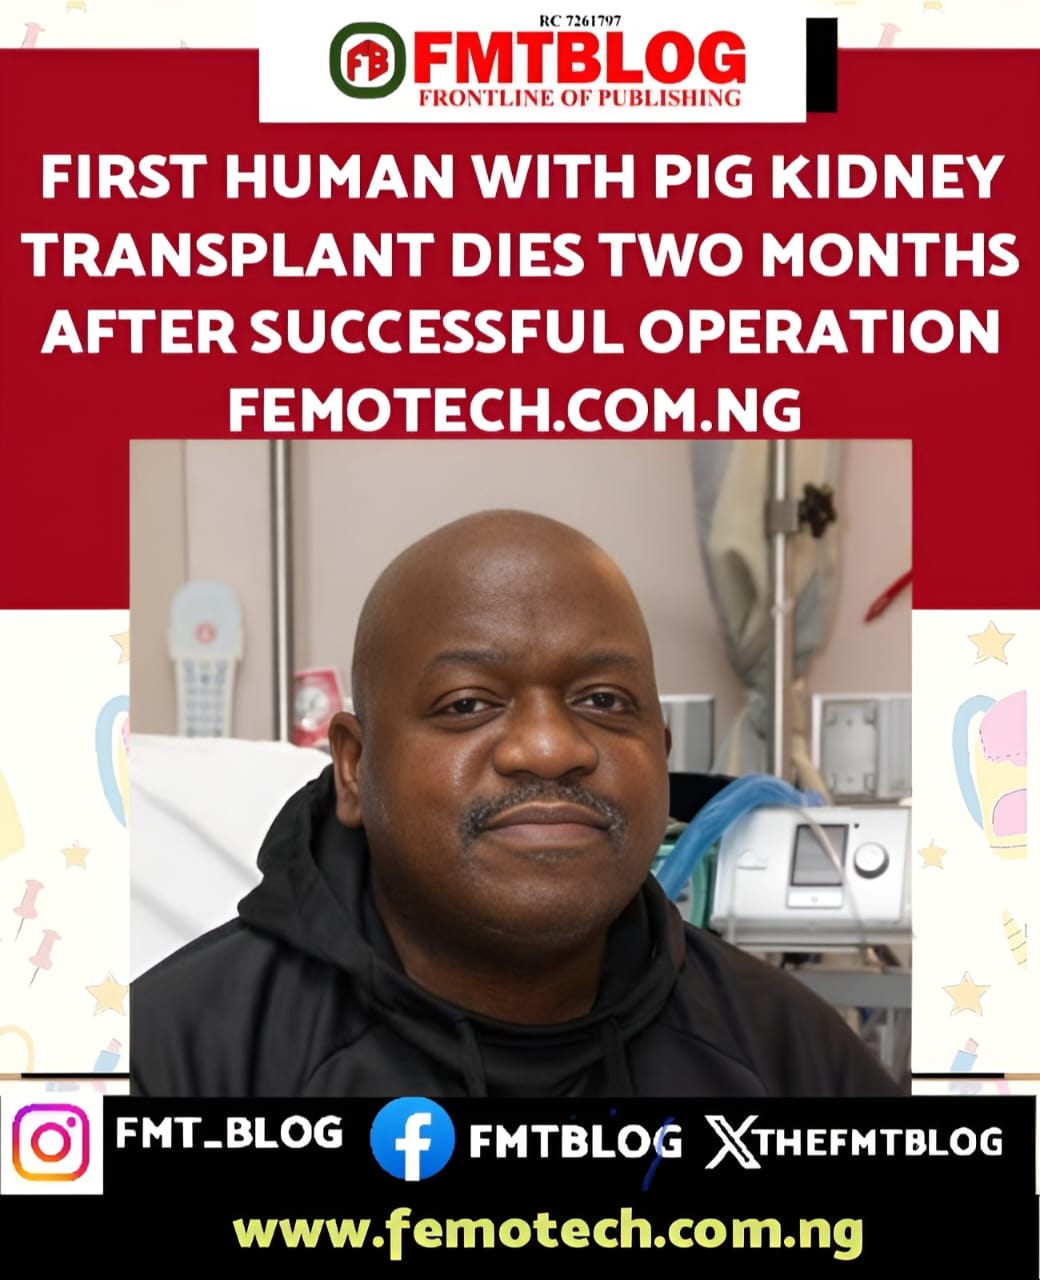 First Human With Pig Kidney Transplant Dies Two Months After Successful Operation